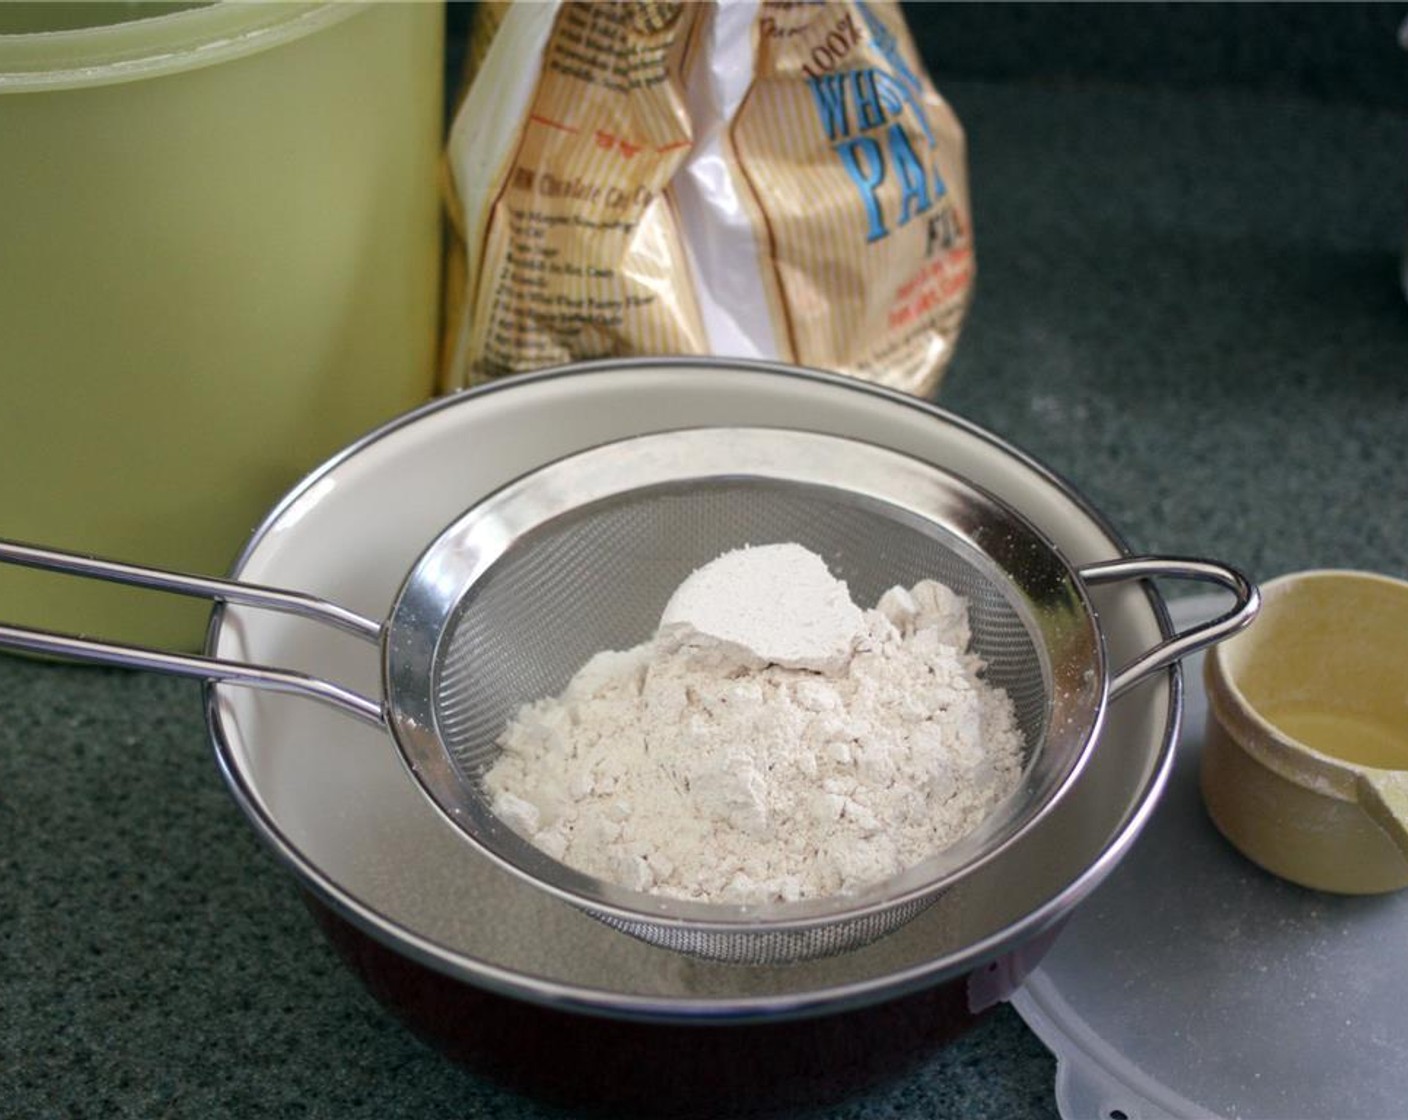 step 4 Add the Baking Powder (1 Tbsp), Ground Cinnamon (1/4 tsp) and Salt (1/4 tsp) then whisk well to combine.